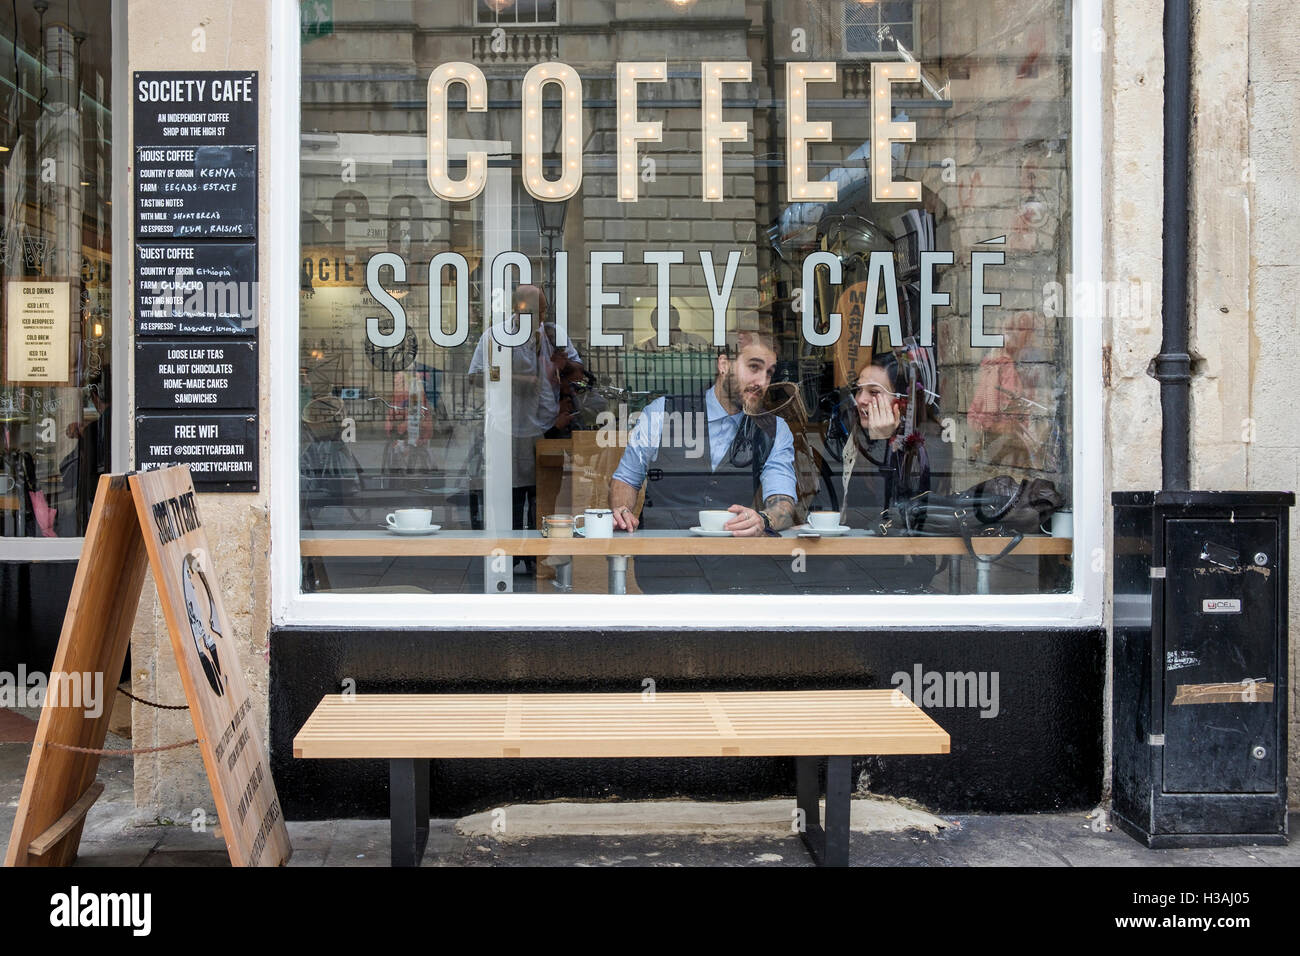 People drinking coffee are pictured sitting inside a coffee cafe in Bath,England,UK Stock Photo